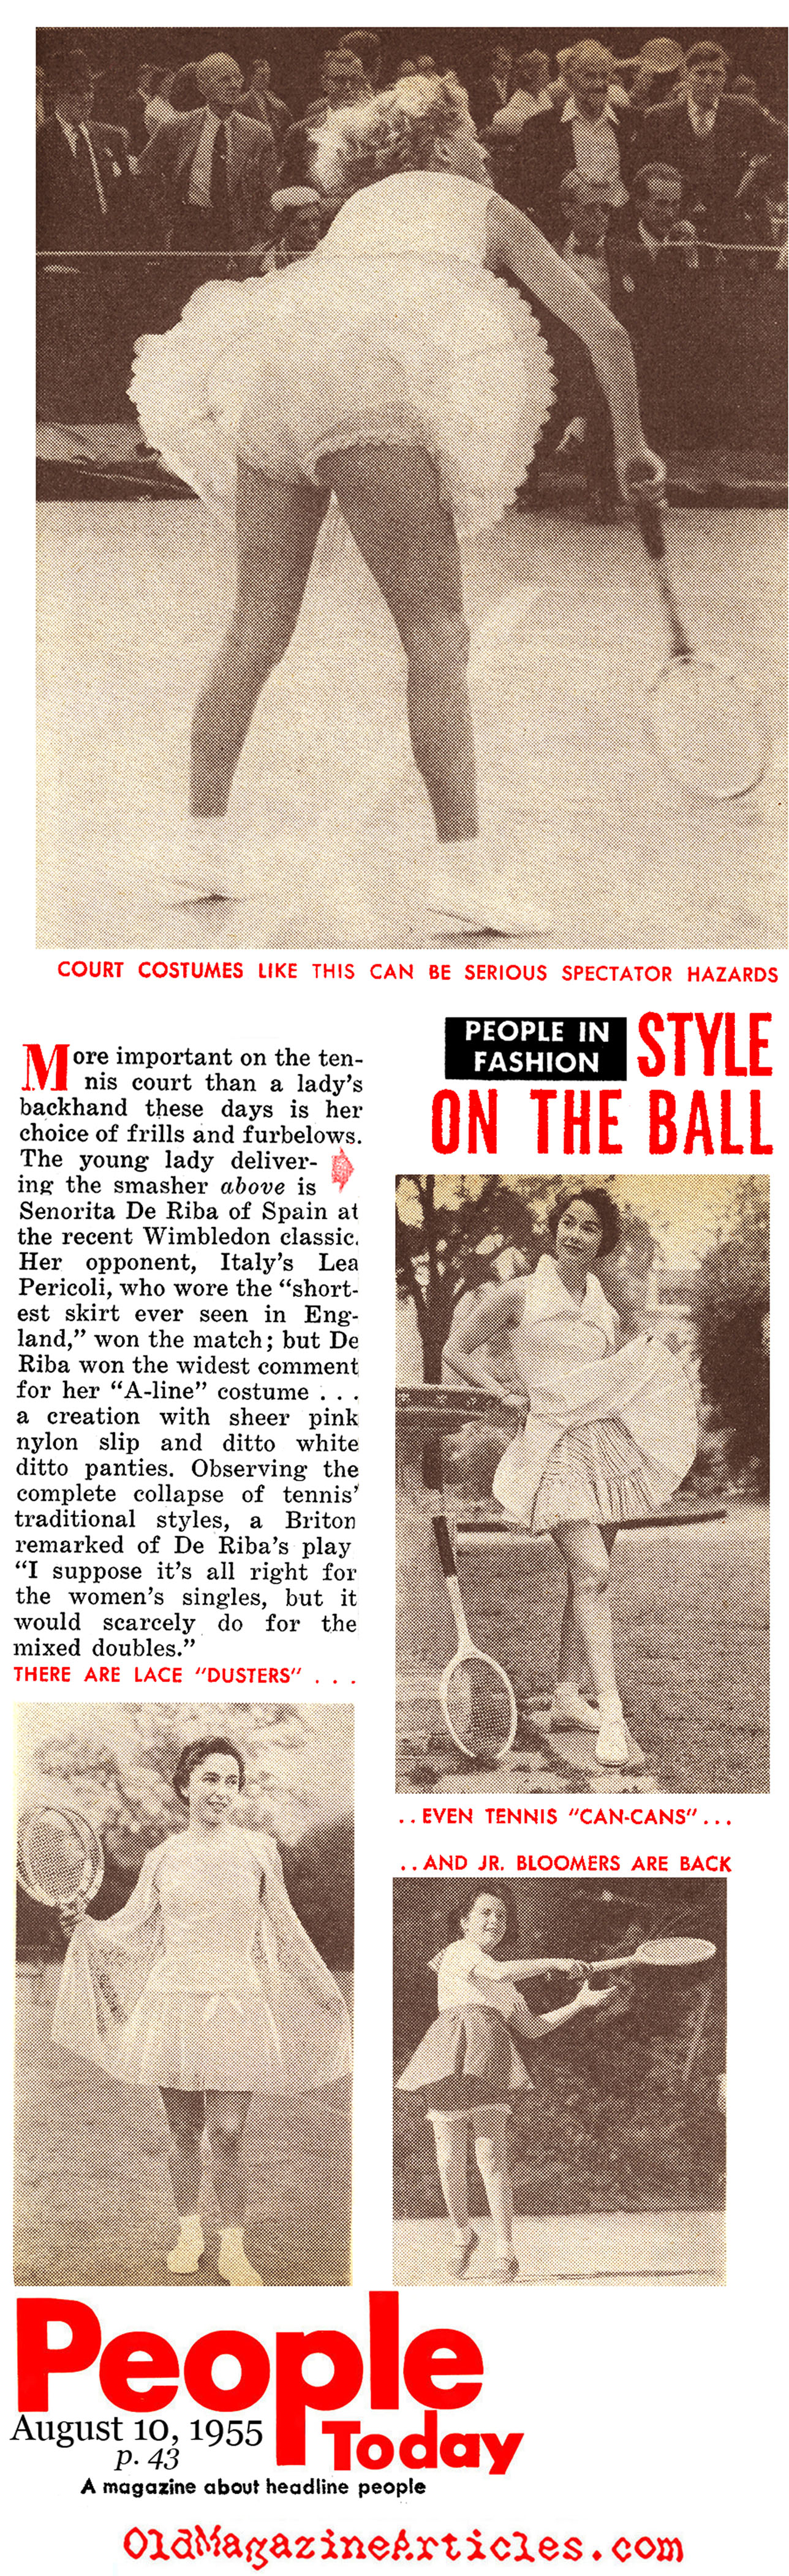 Tennis Skirts of the Mid-Fifties (People Today Magazine, 1955)